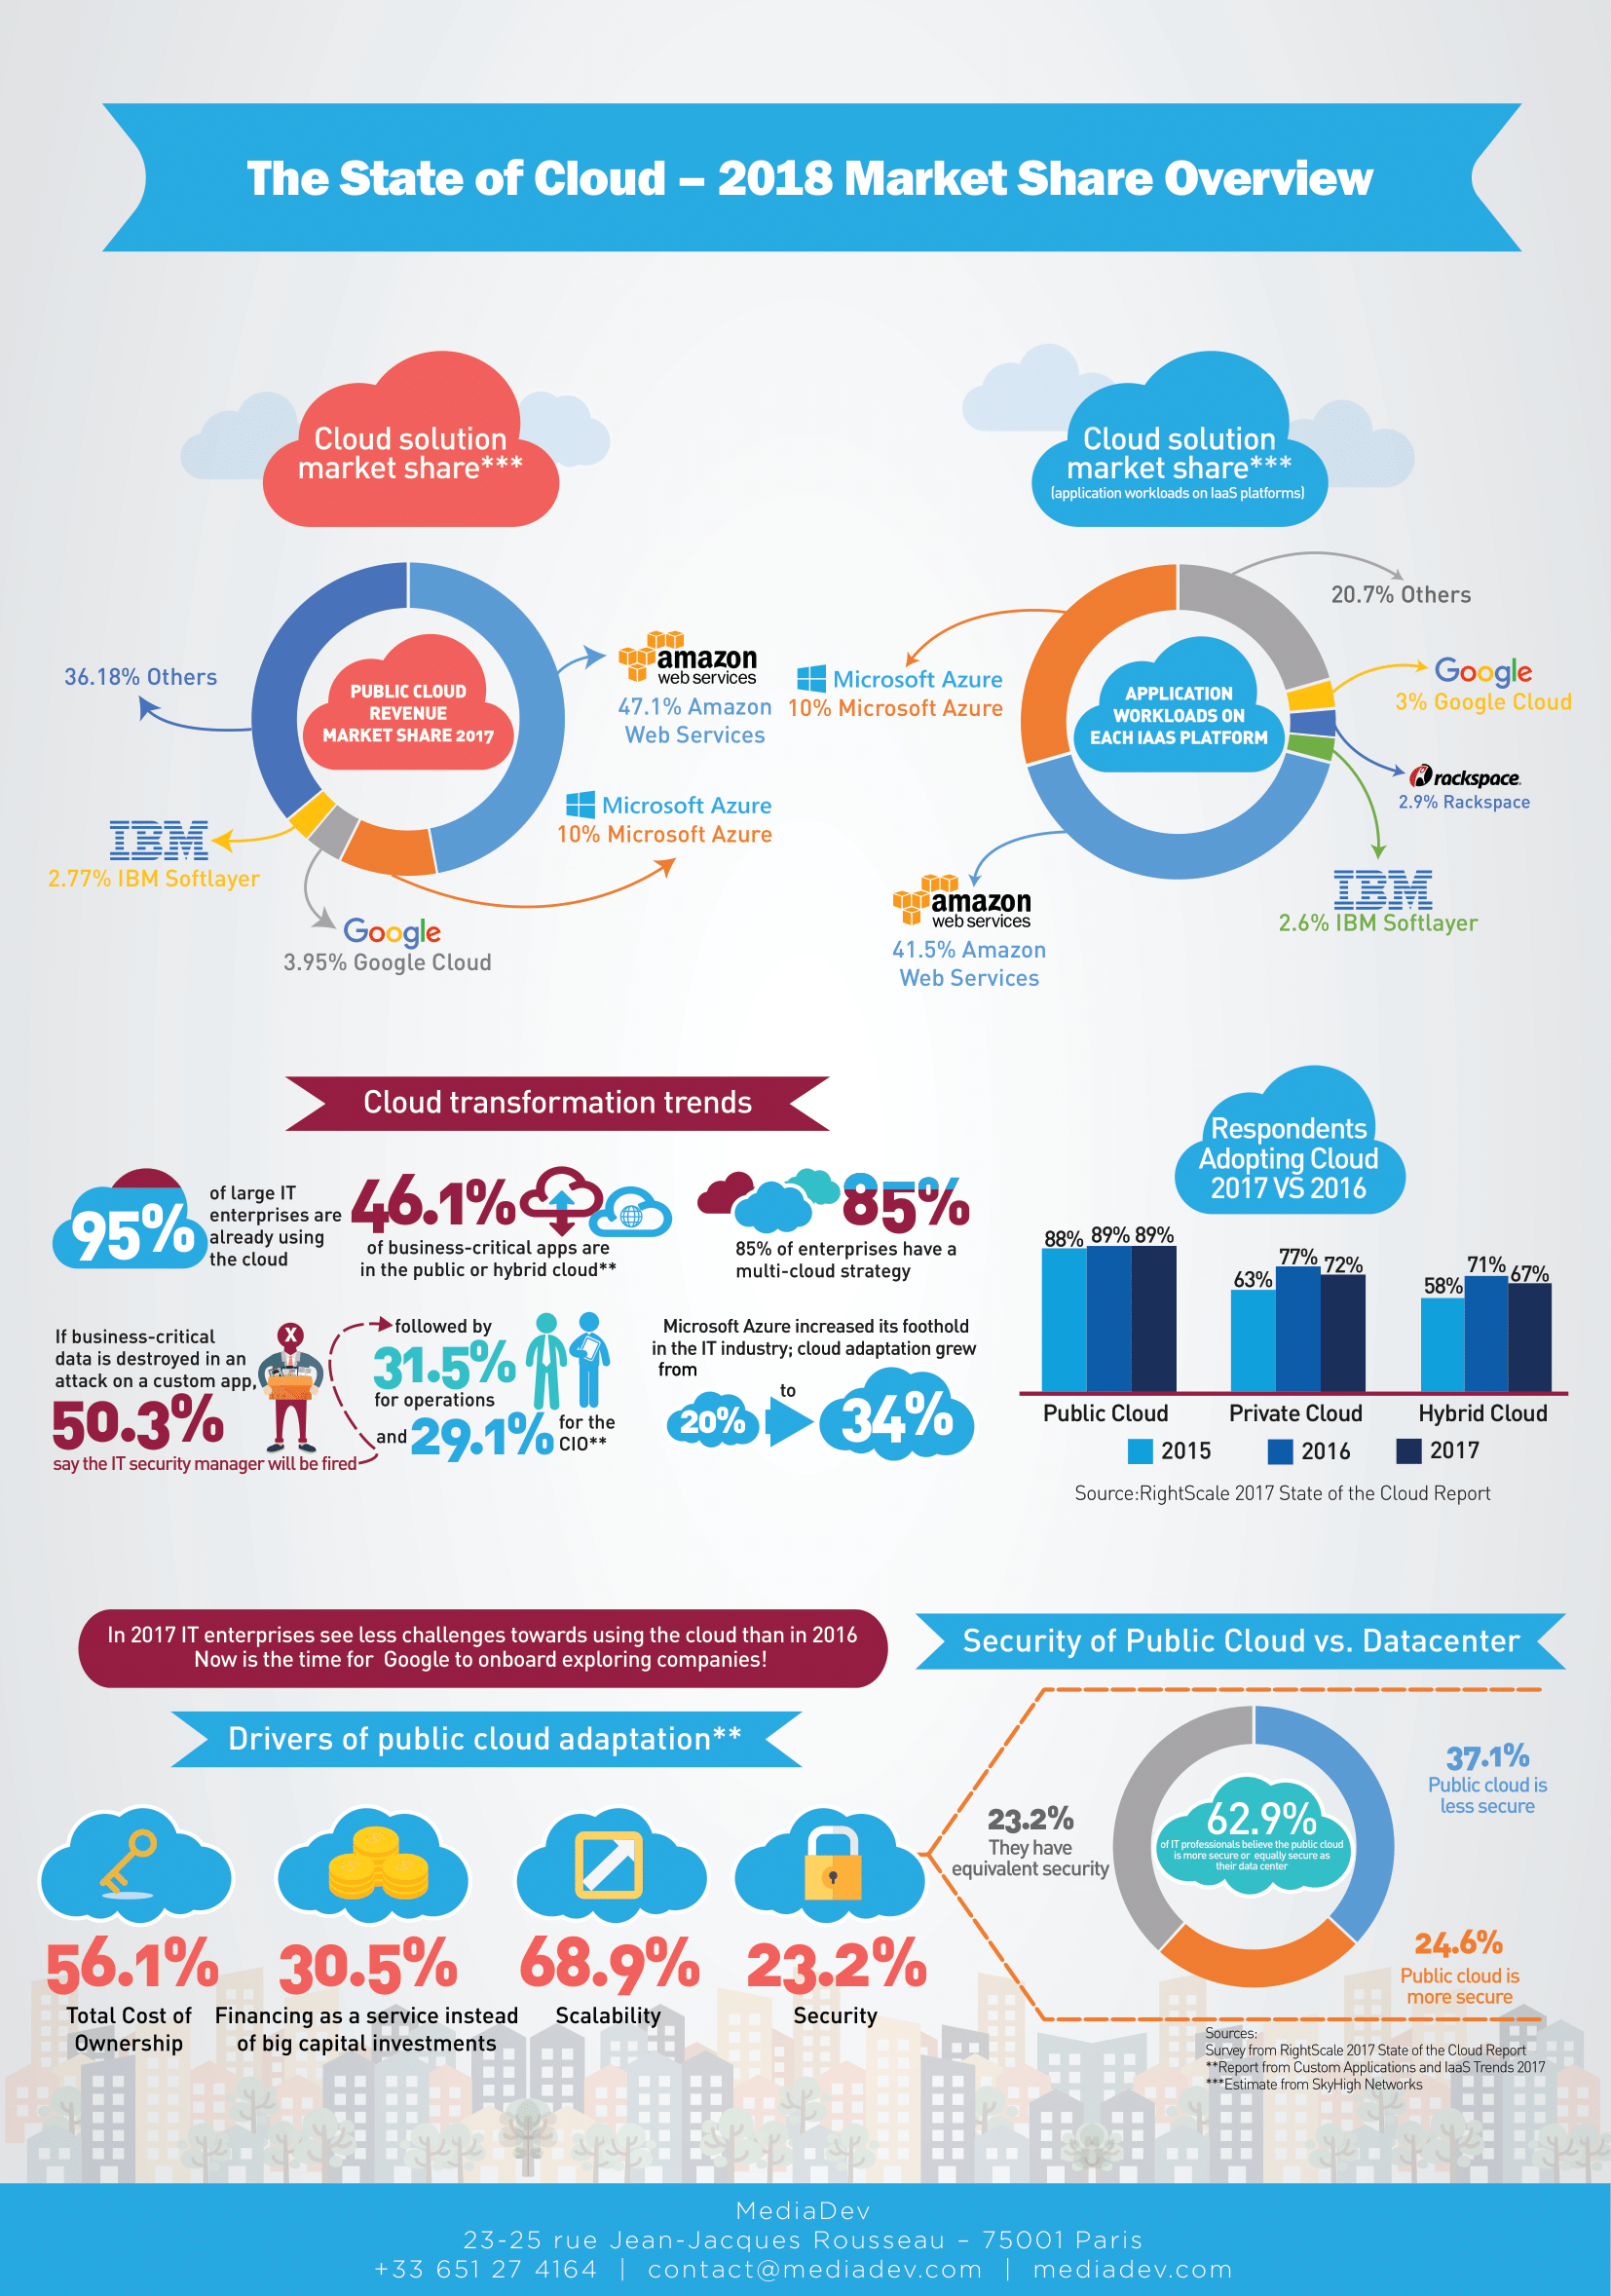 The State of Cloud - 2018 Market Share Overview